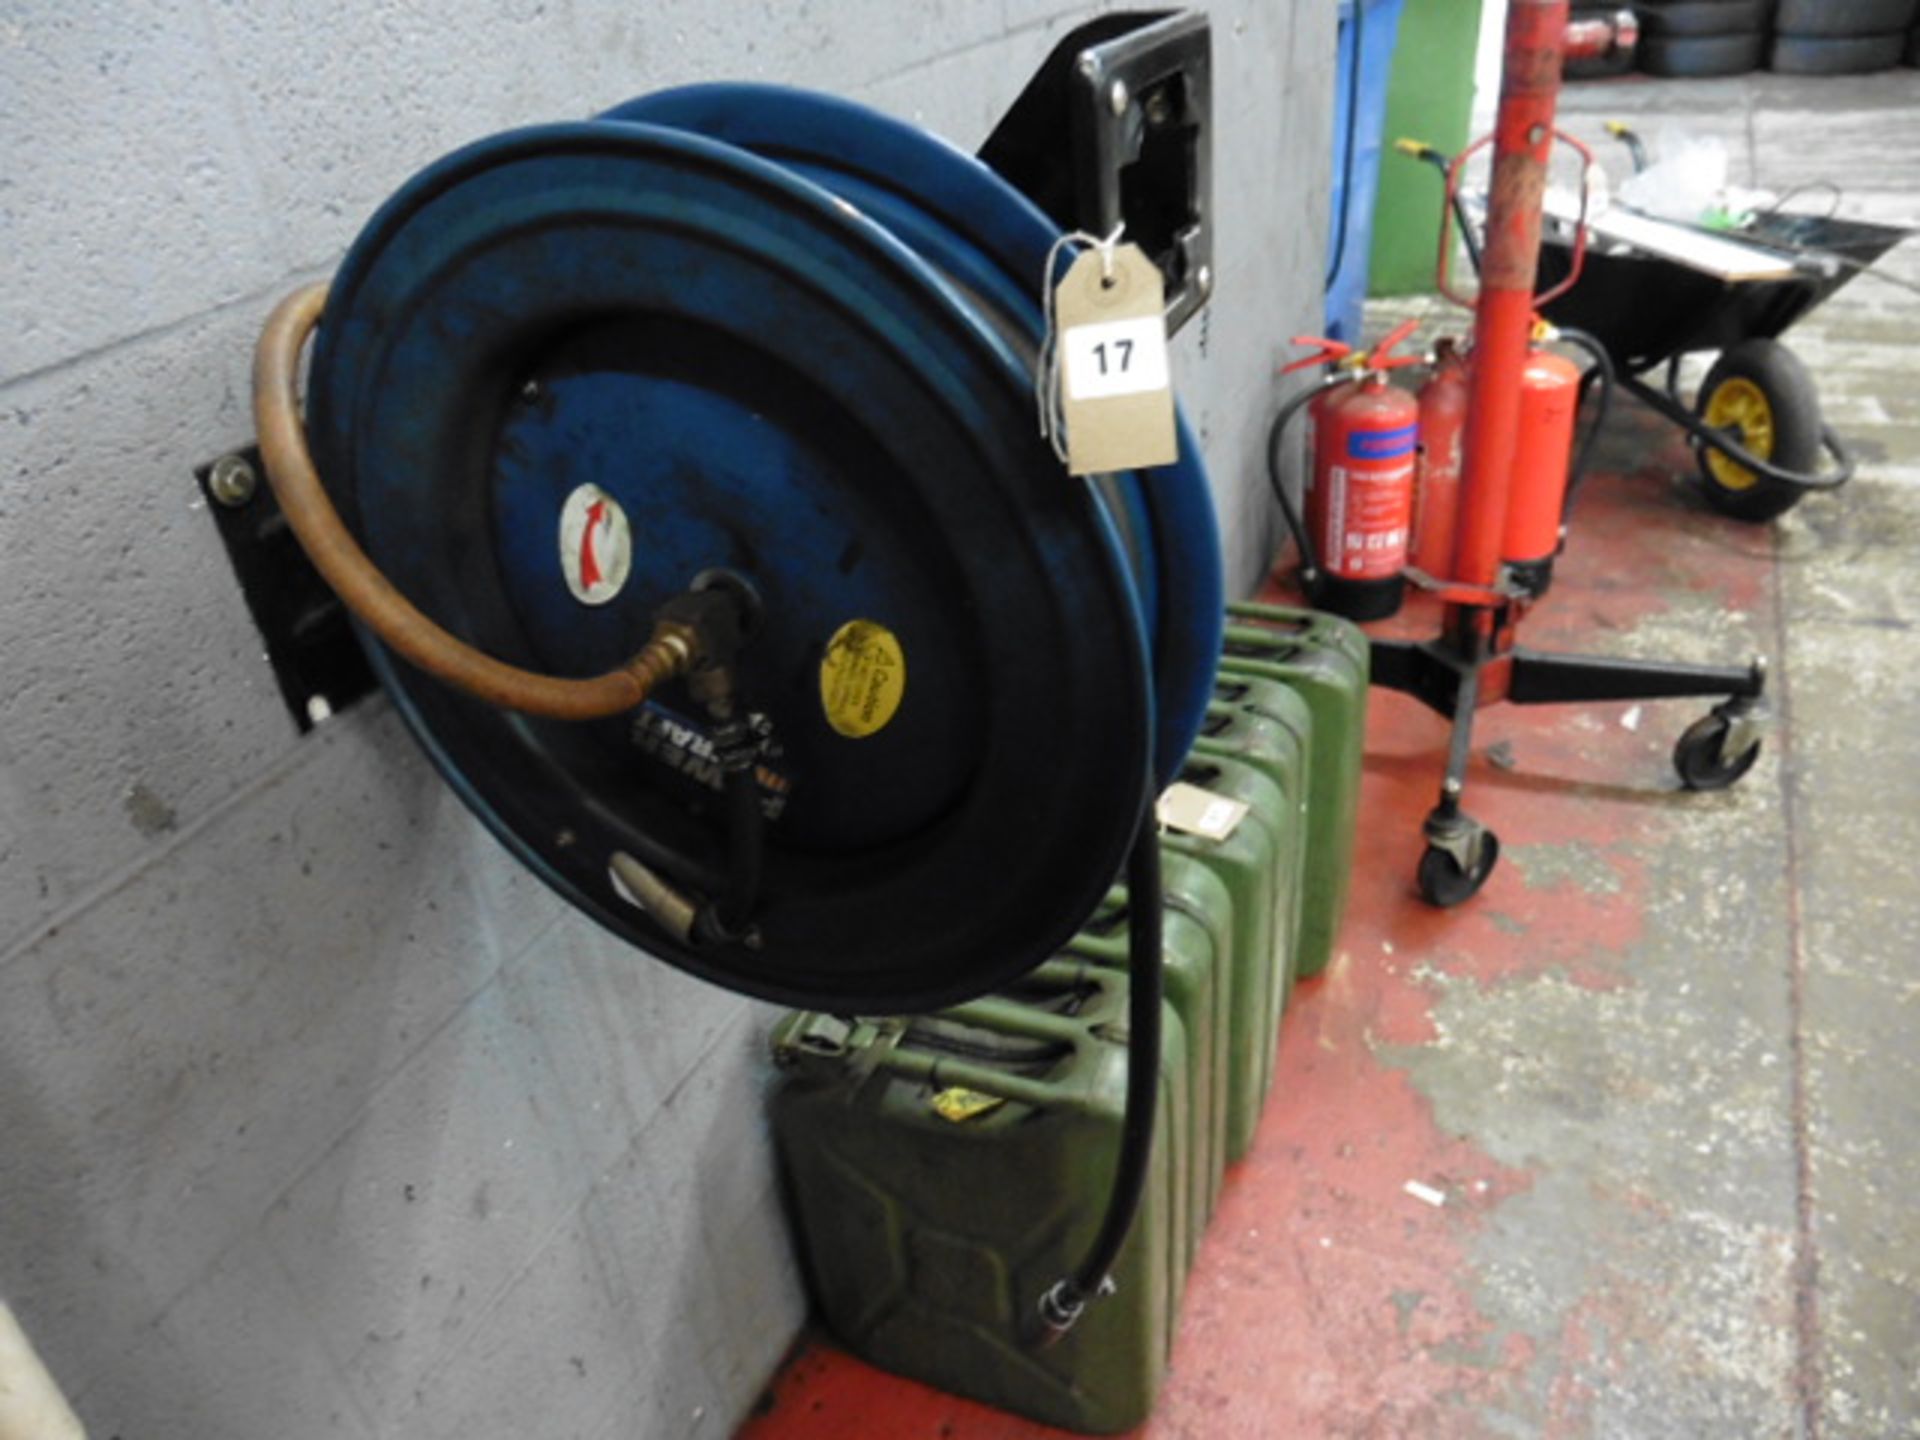 Power Craft air hose and reel